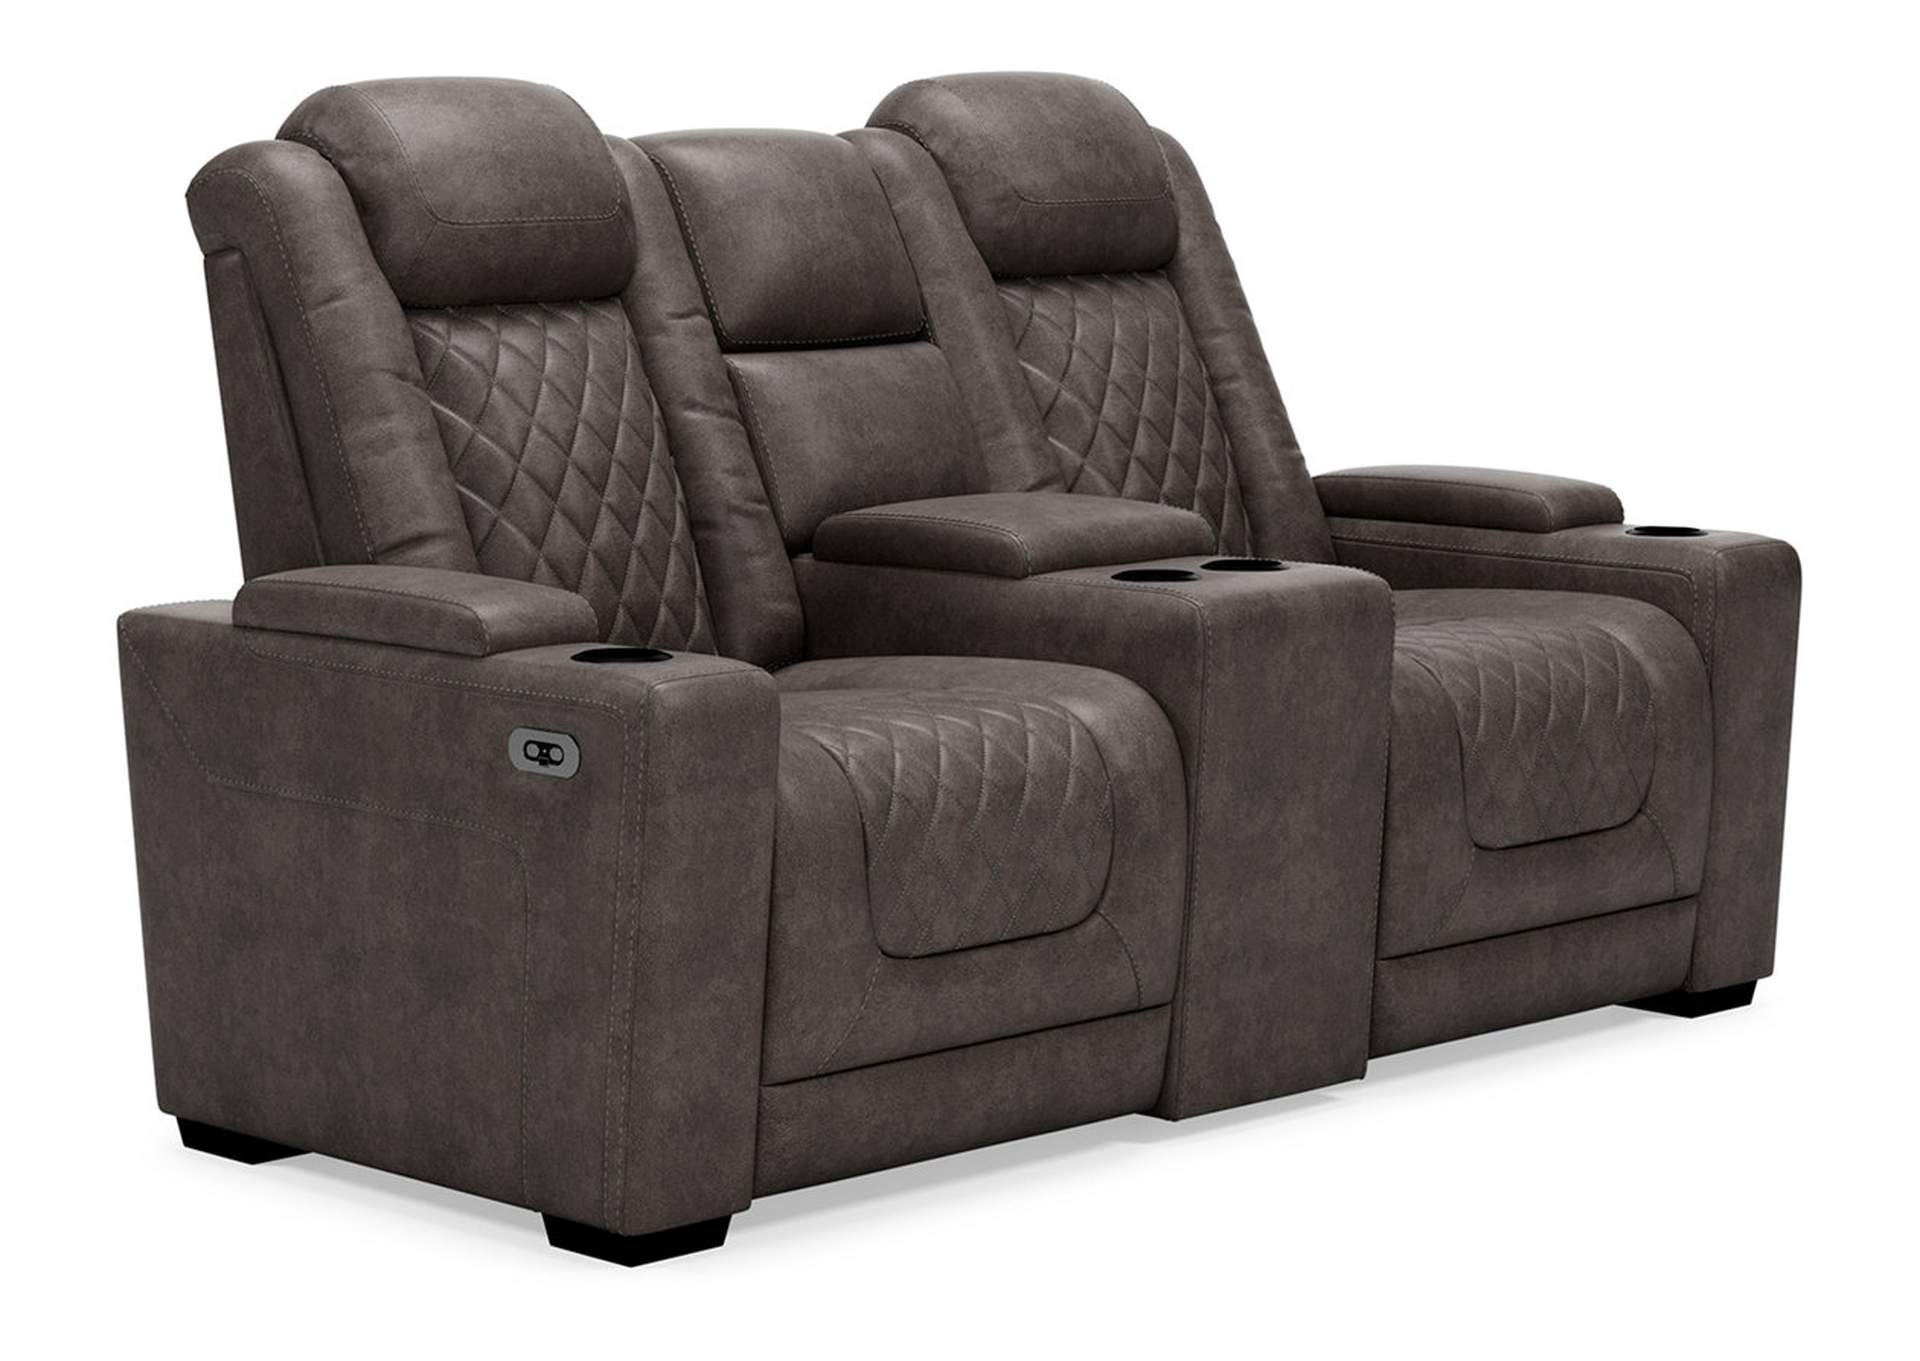 HyllMont Sofa, Loveseat and Recliner,Signature Design By Ashley